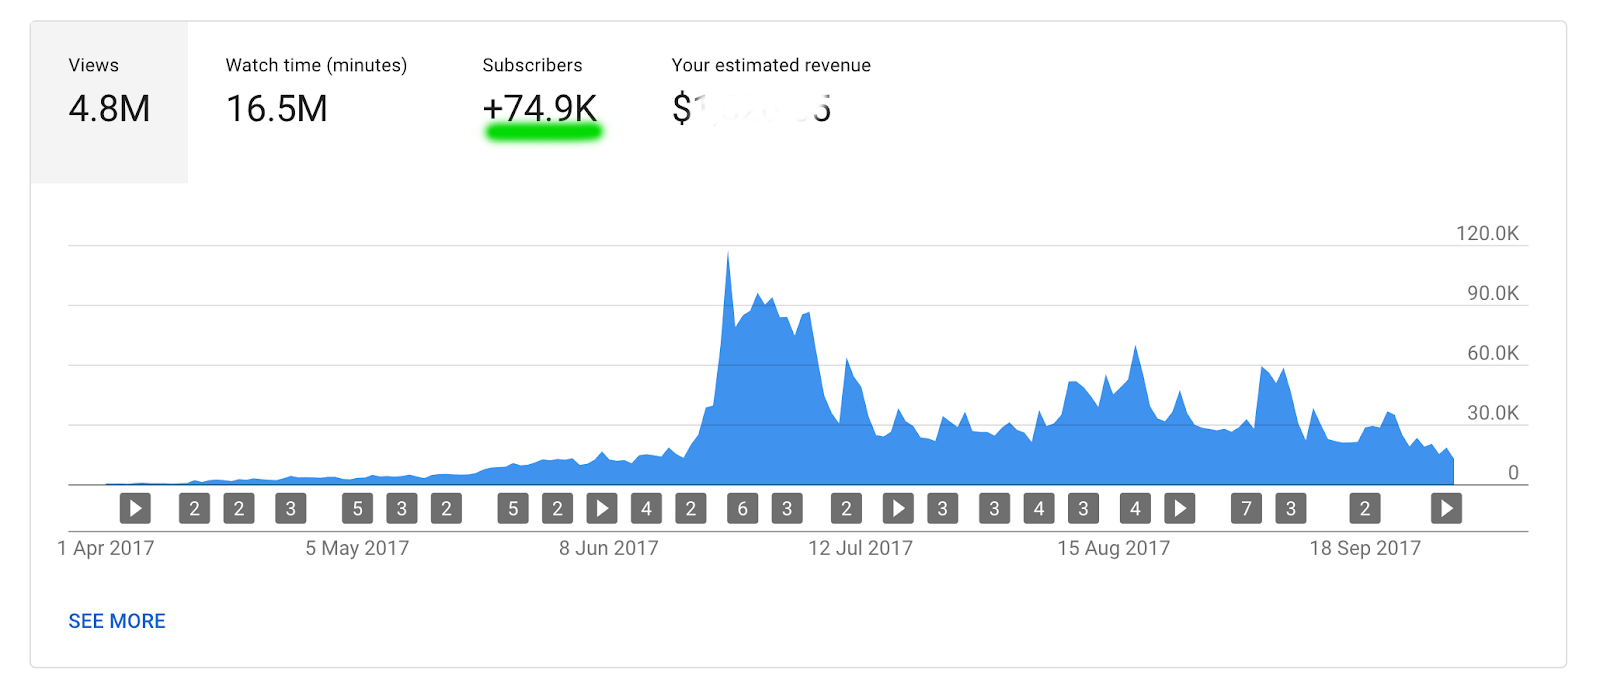 subscriber growth